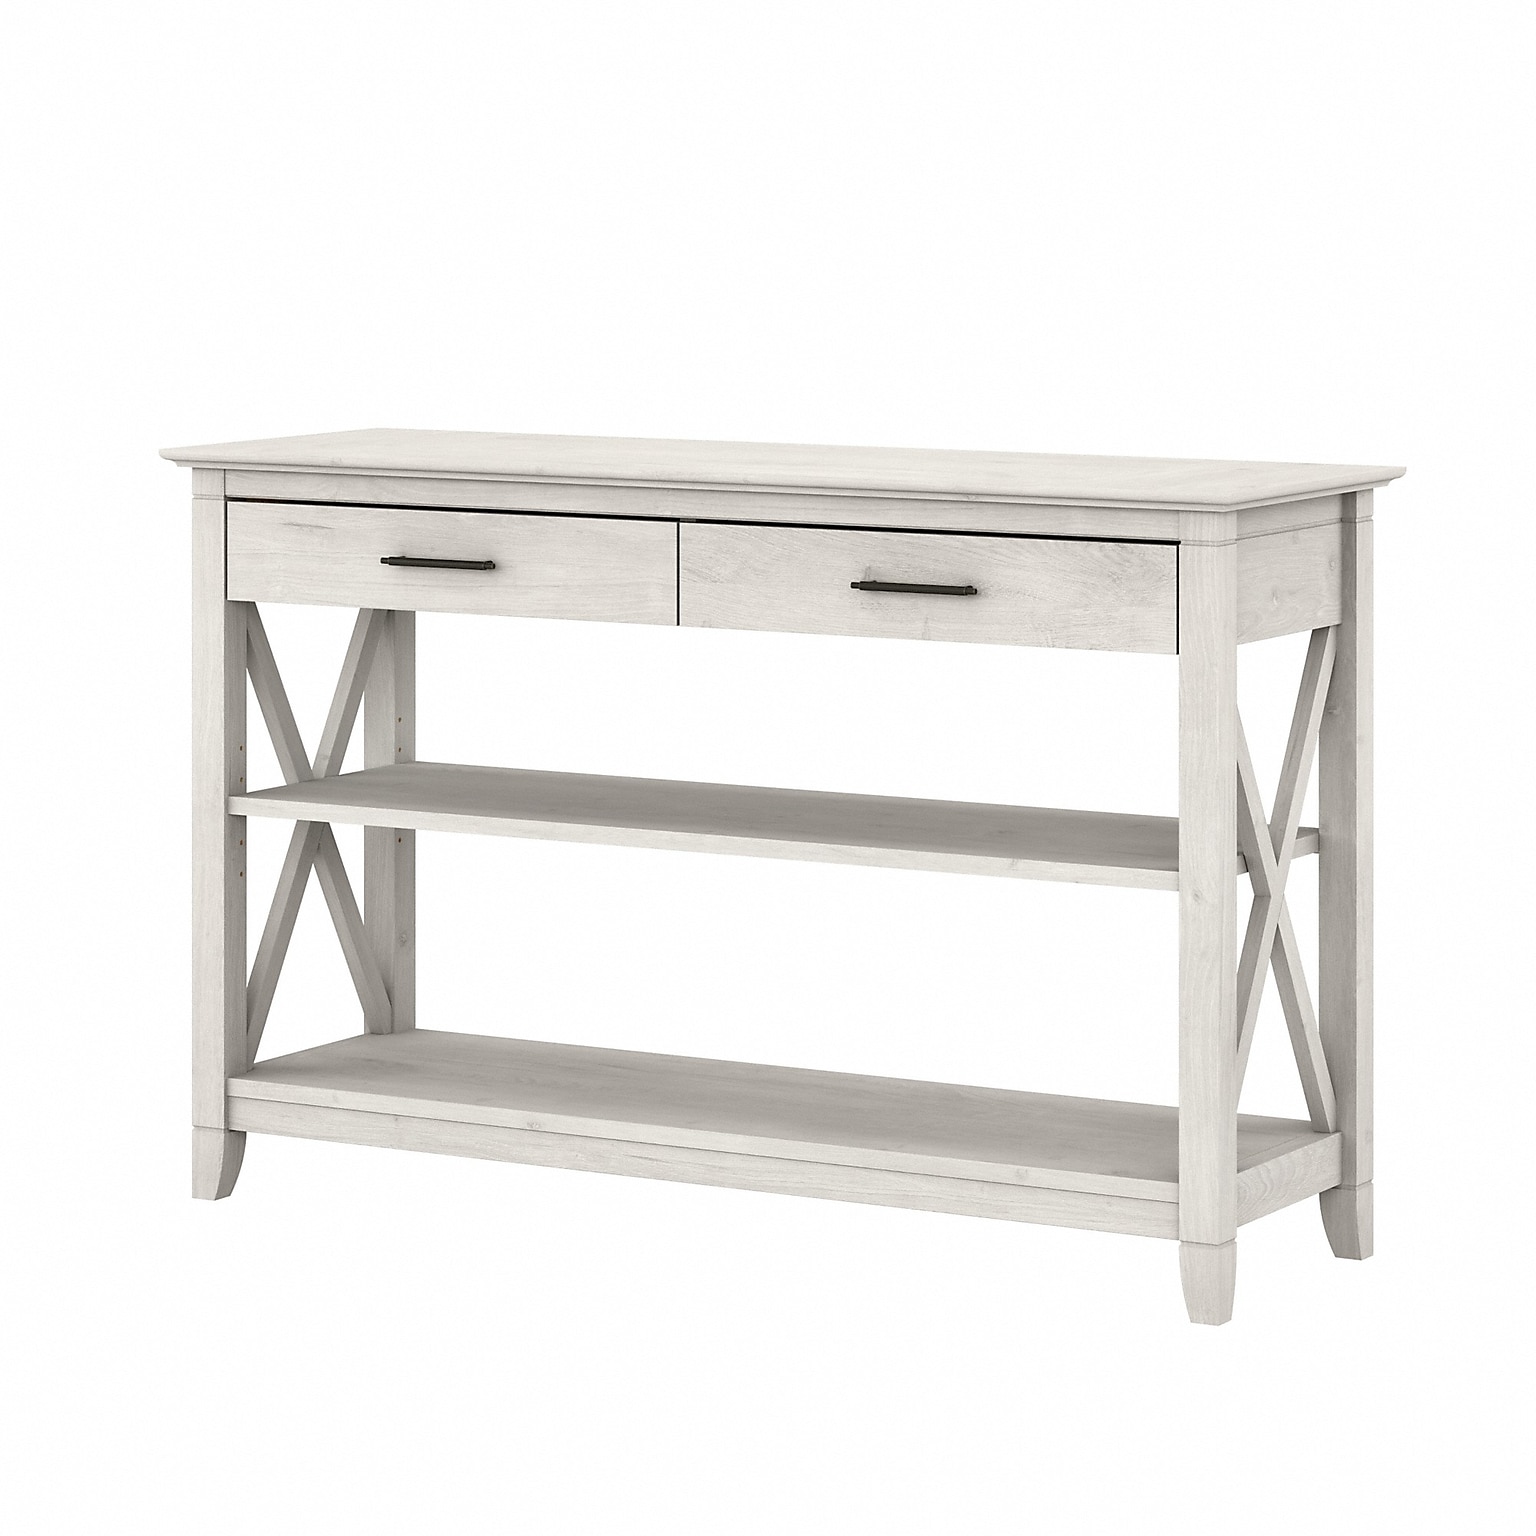 Bush Furniture Key West 47 x 16 Console Table with Drawers and Shelves, Linen White Oak (KWT248LW-03)